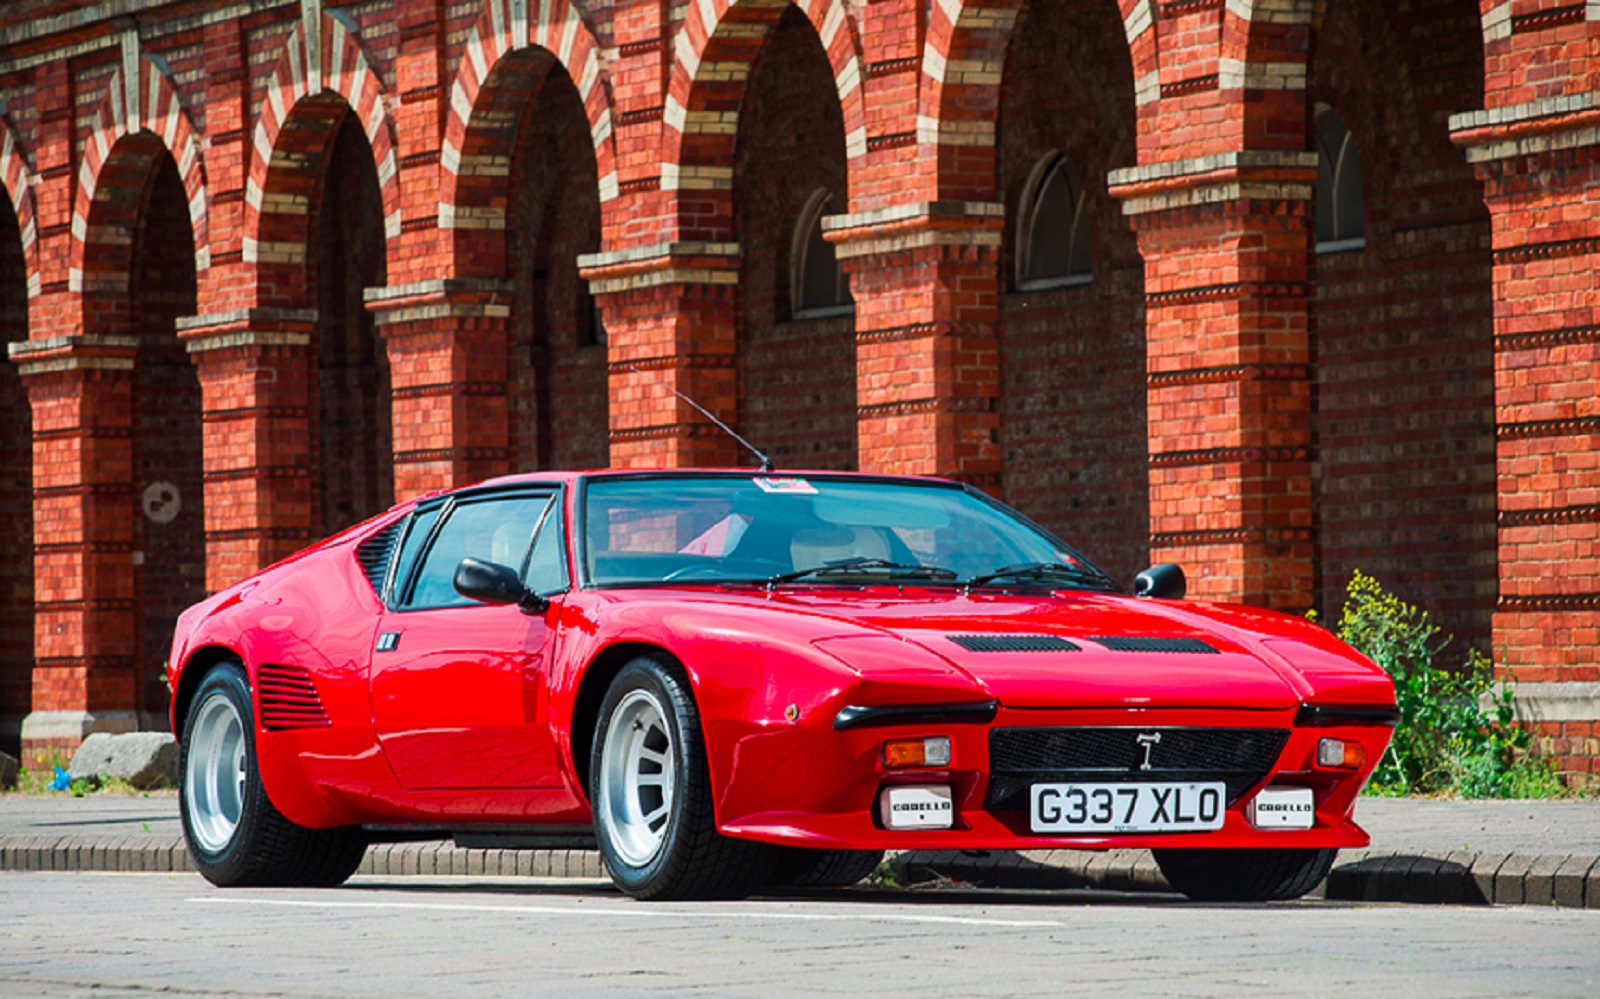 <p>For a car with such an exotic name, looks and performance, the Pantera notched up decent sales figures. Partly this was down to sales lasting 20 years and also because it cleverly used a rugged, easily tuned <strong>Ford V8 motor</strong>. That made it a popular alternative to other European supercars in the USA, where it remains a popular classic choice.</p><p><strong>Elvis Presley</strong> was one of many notable owners – once, he was so enraged when his Pantera failed to start, he shot it.</p>